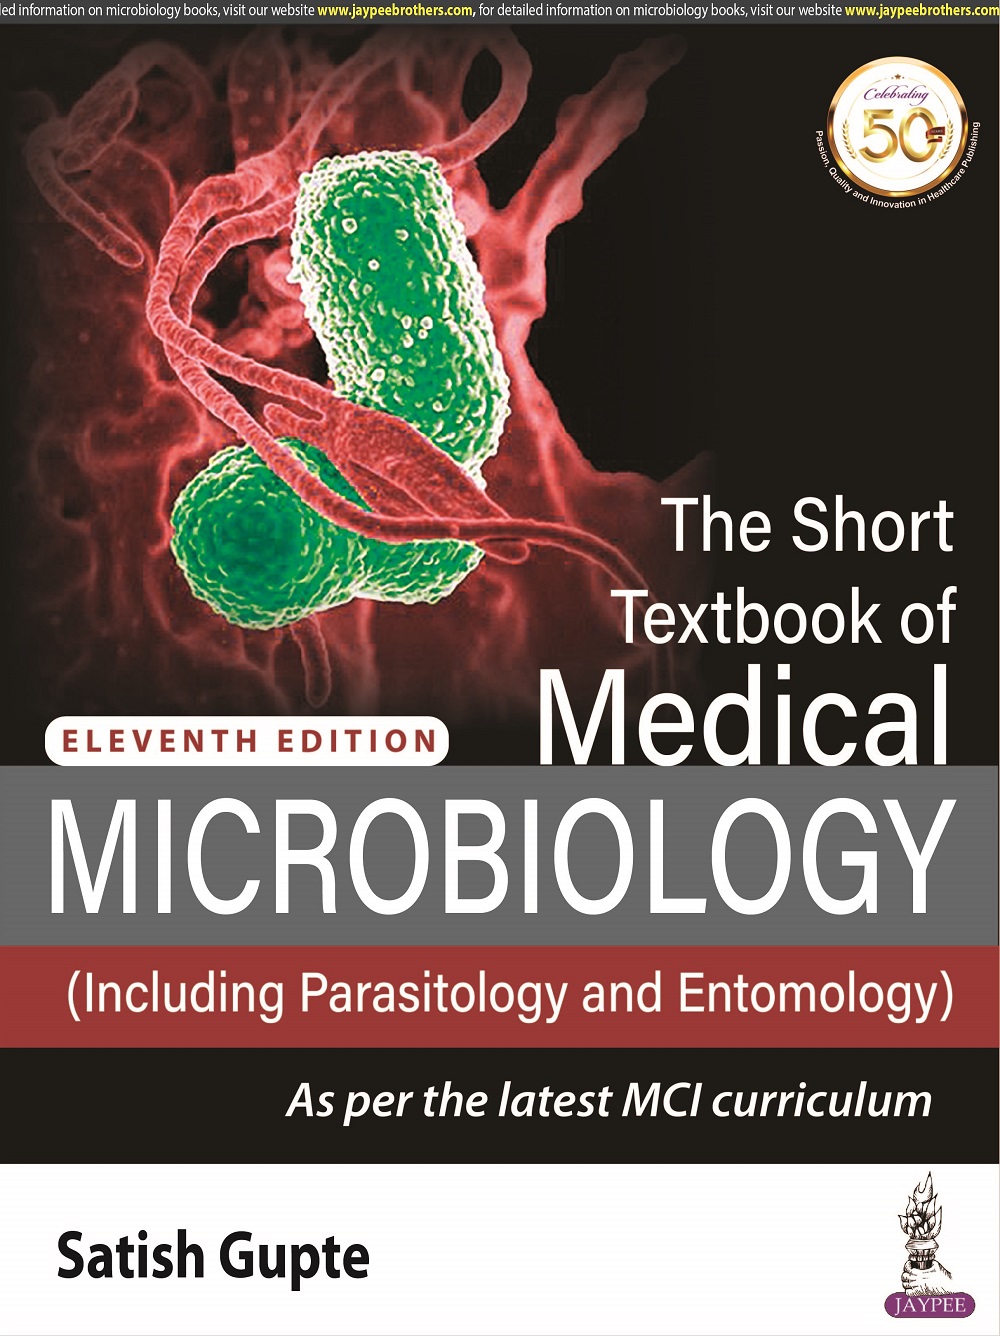 The Short Textbook Of Medical Microbiology (Including Parasitology And Entomology)
